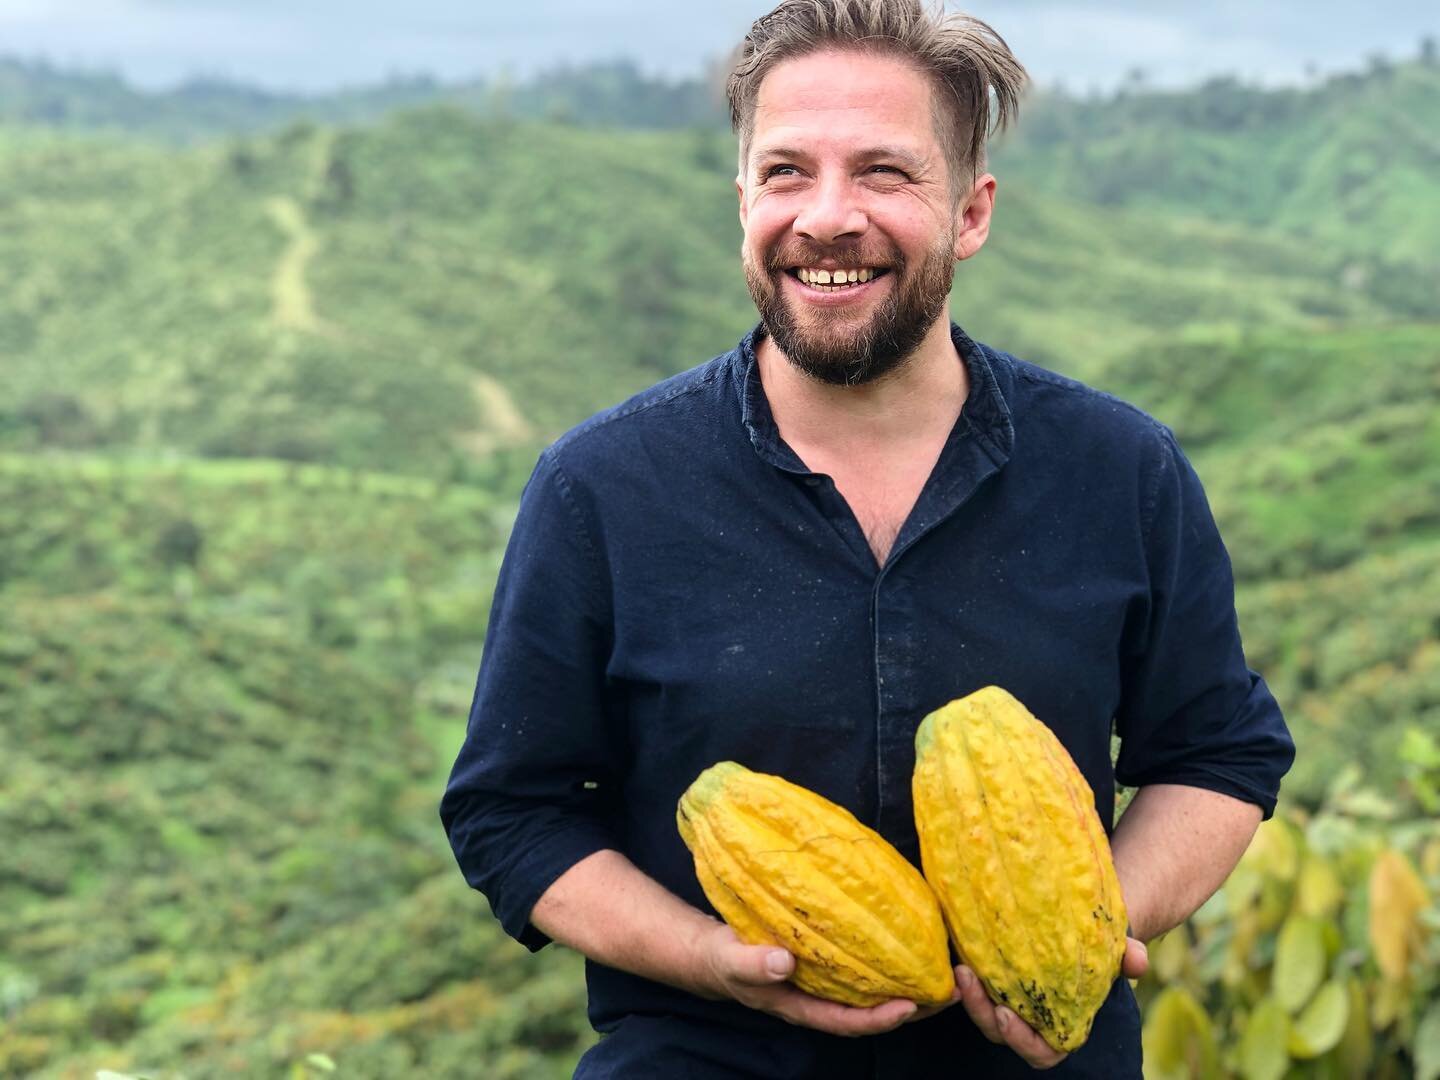 One happy chocolate maker with cacao trees as far as you can see

#veganlife #vegan #cacao #cleantreats  #chocolate #coconut #foodnetwork #foodnews #yummy #foodie #foodoftheday #cococaravan #fantastic #amazing #awesome #instafood #instagood #plasticf